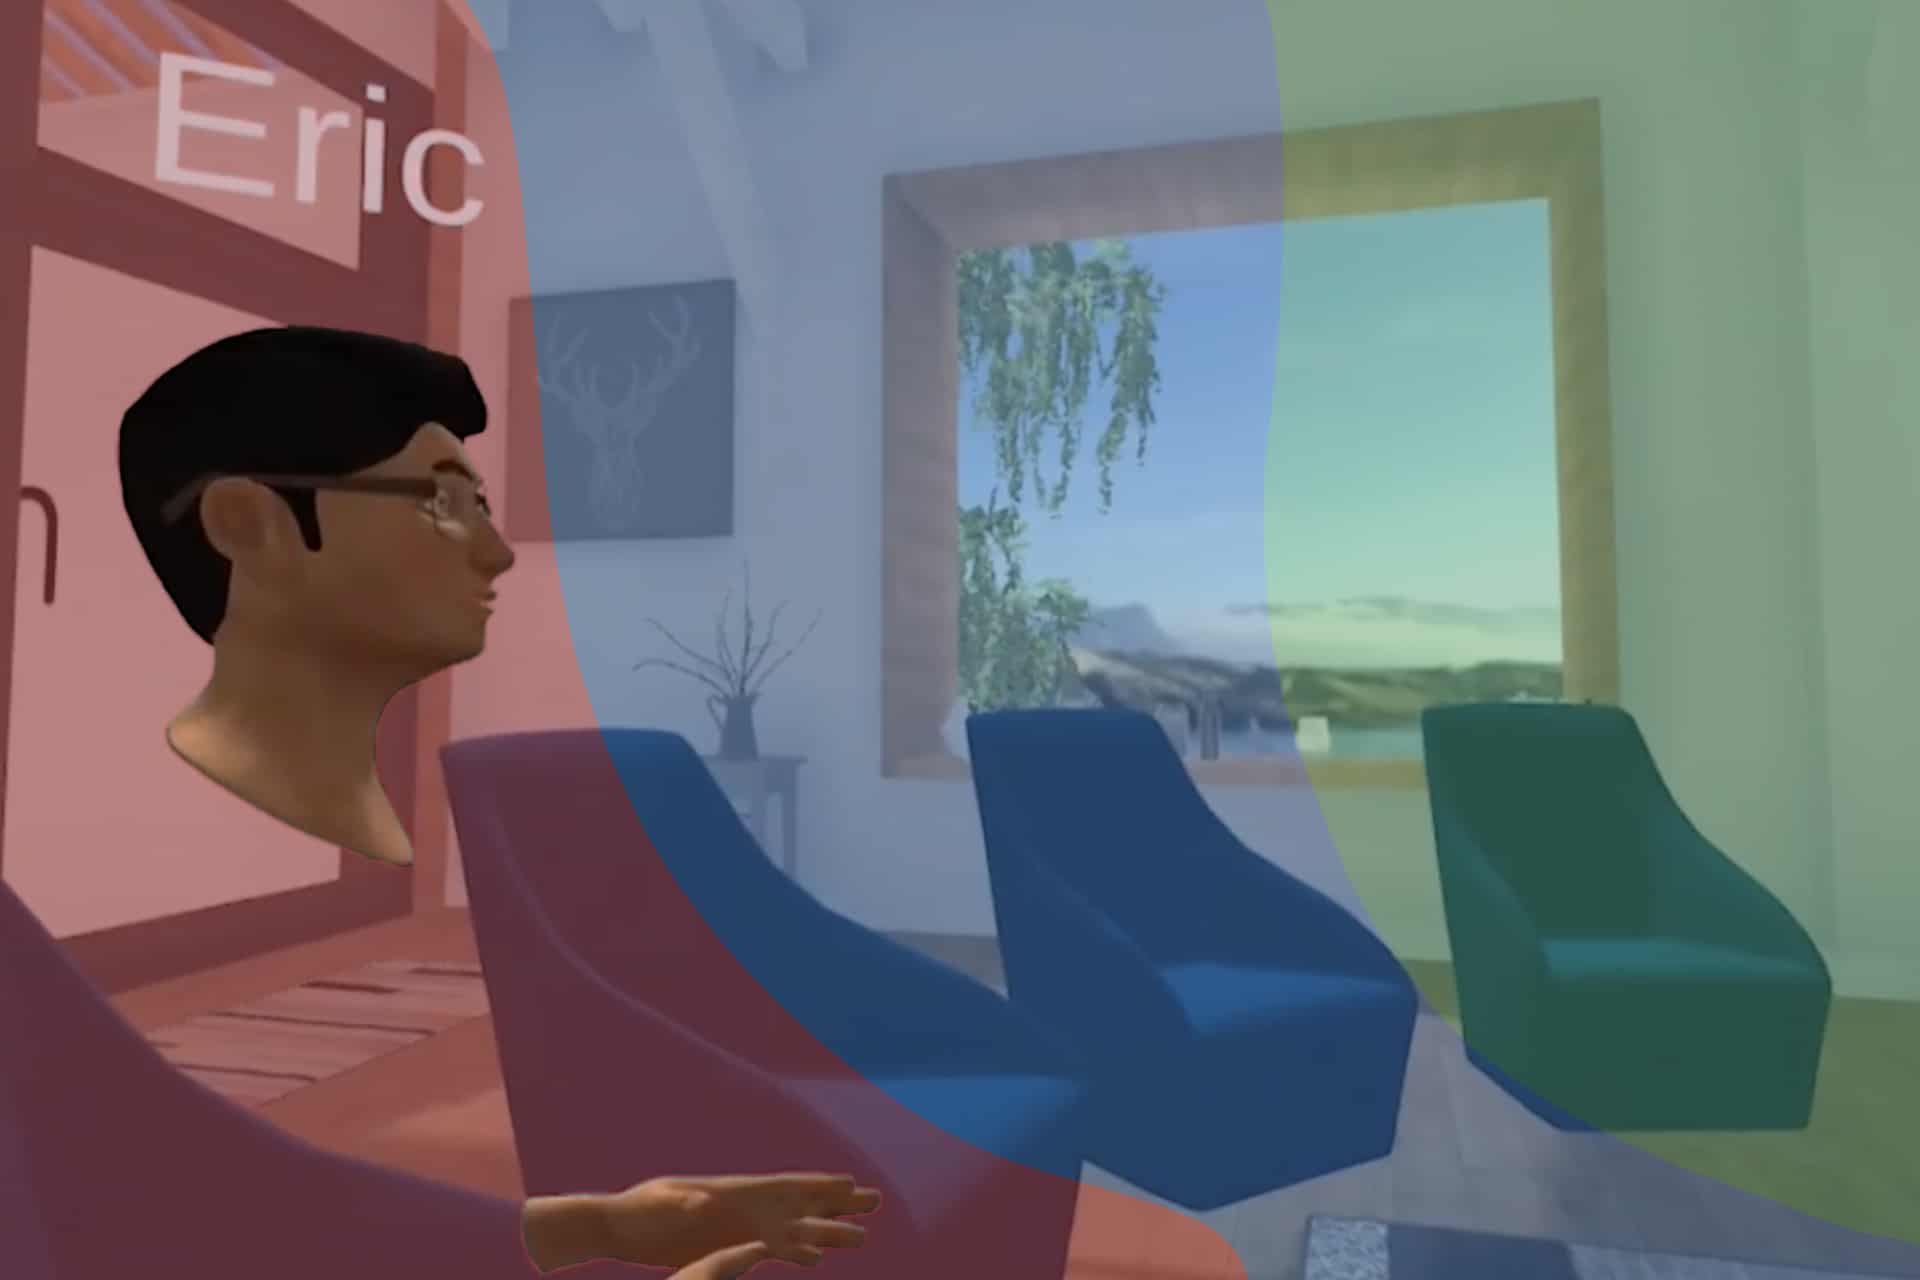 virtual reality (VR) support groups and therapy